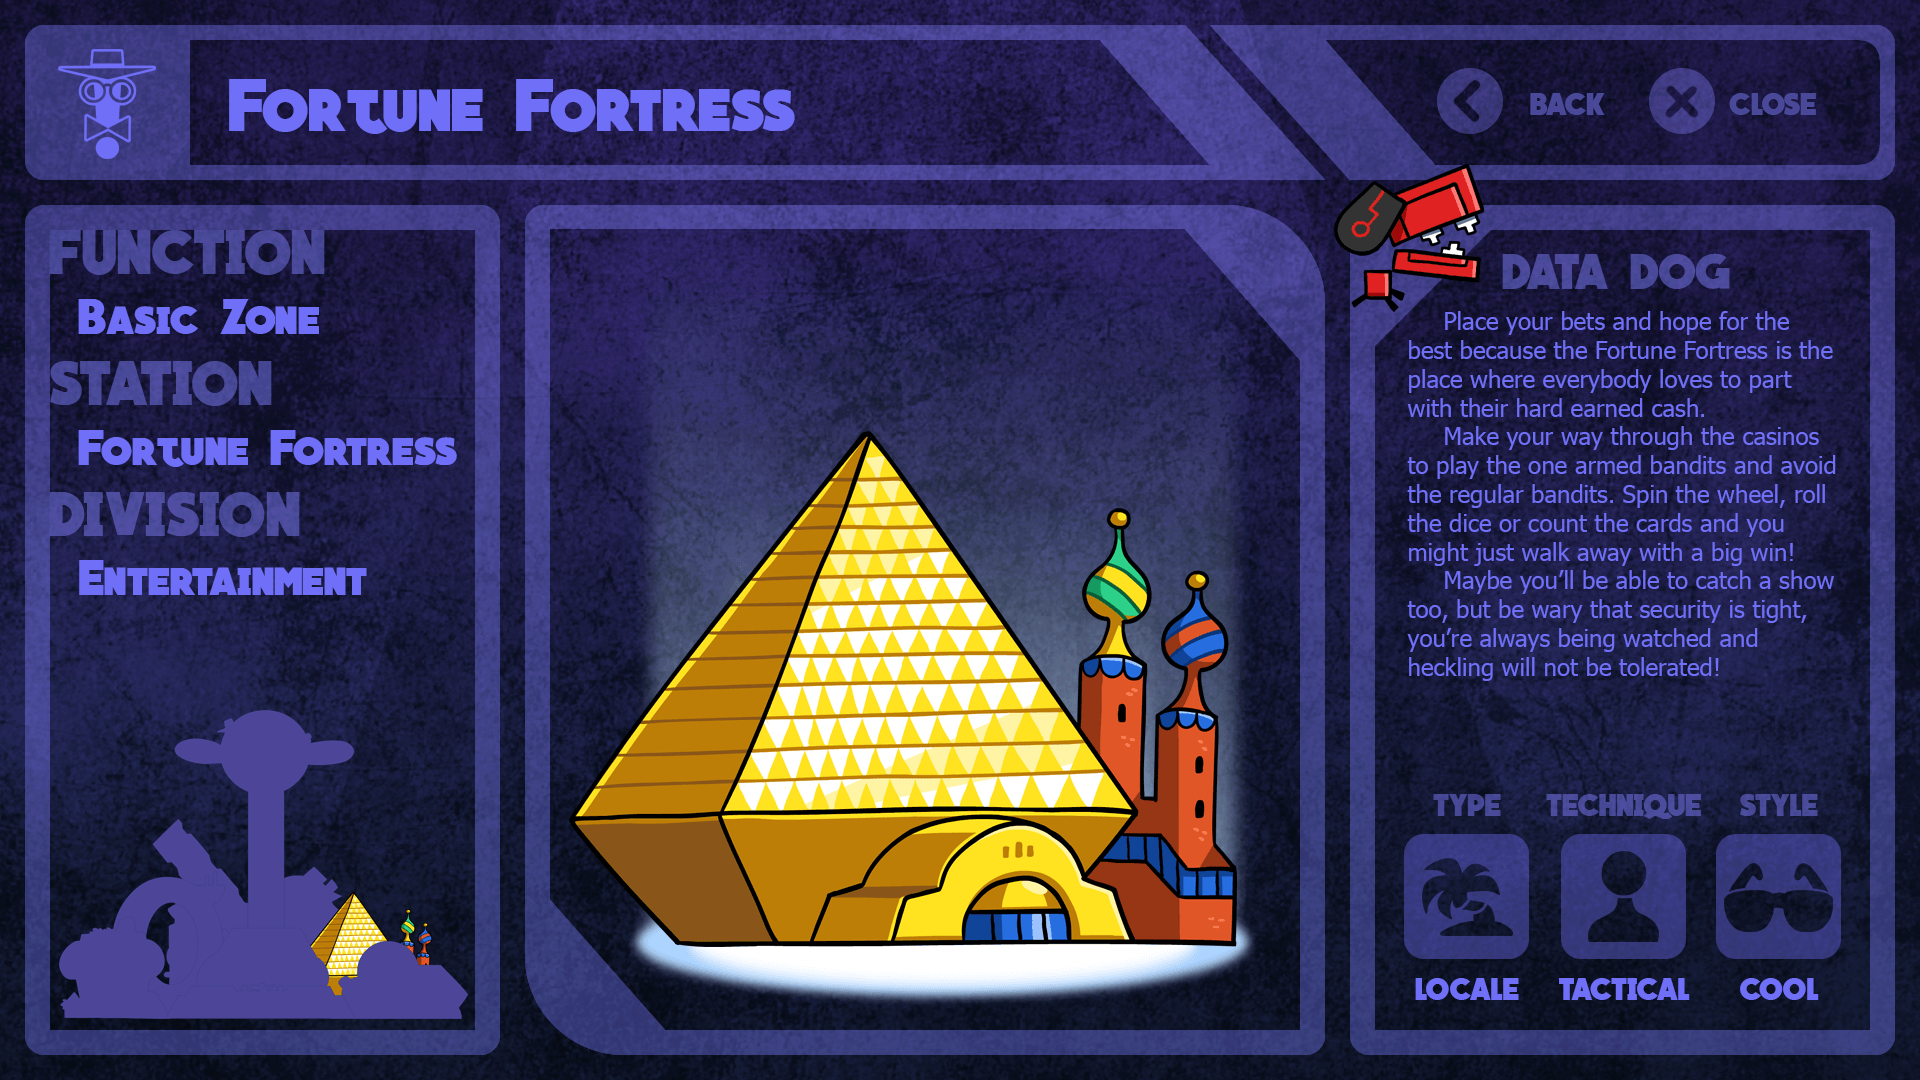 FORTUNE FORTRESS